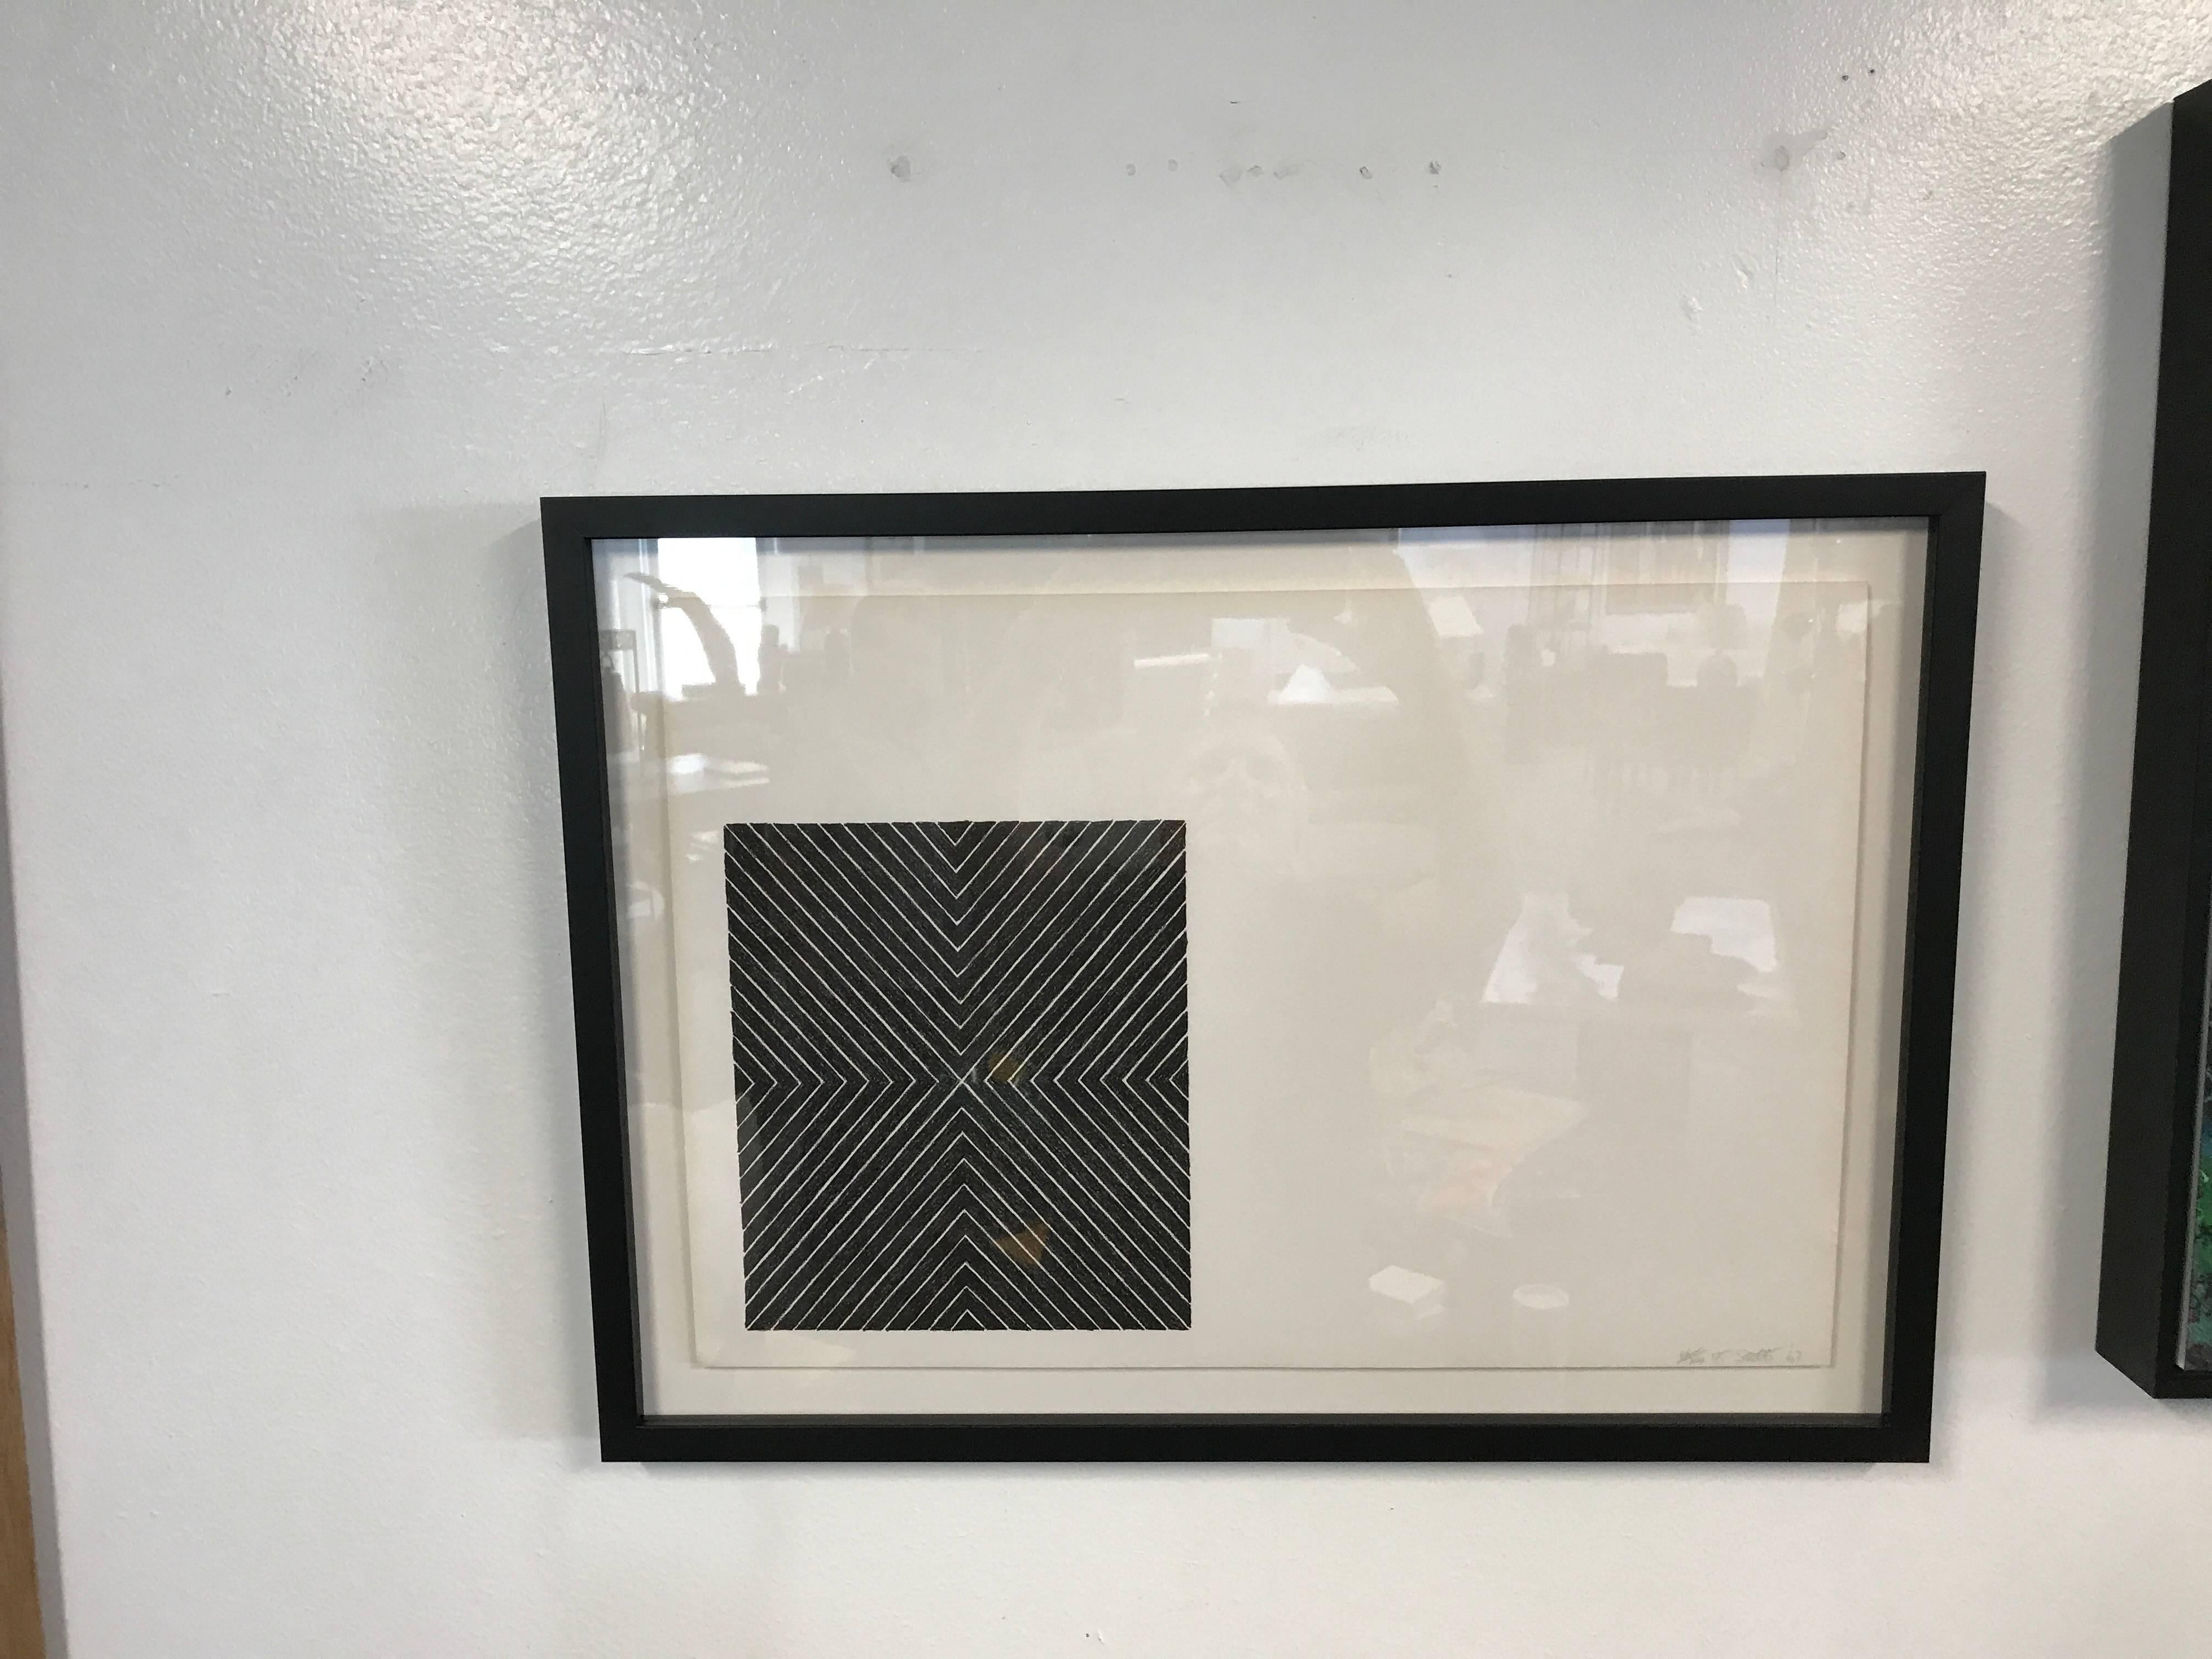 A special lithograph by the renowned artist Frank Stella. This is from the first year he started making lithographs and is from his Black Series II. This particular Lithograph is in the collection of the Tate Museum. It is signed in pencil lower